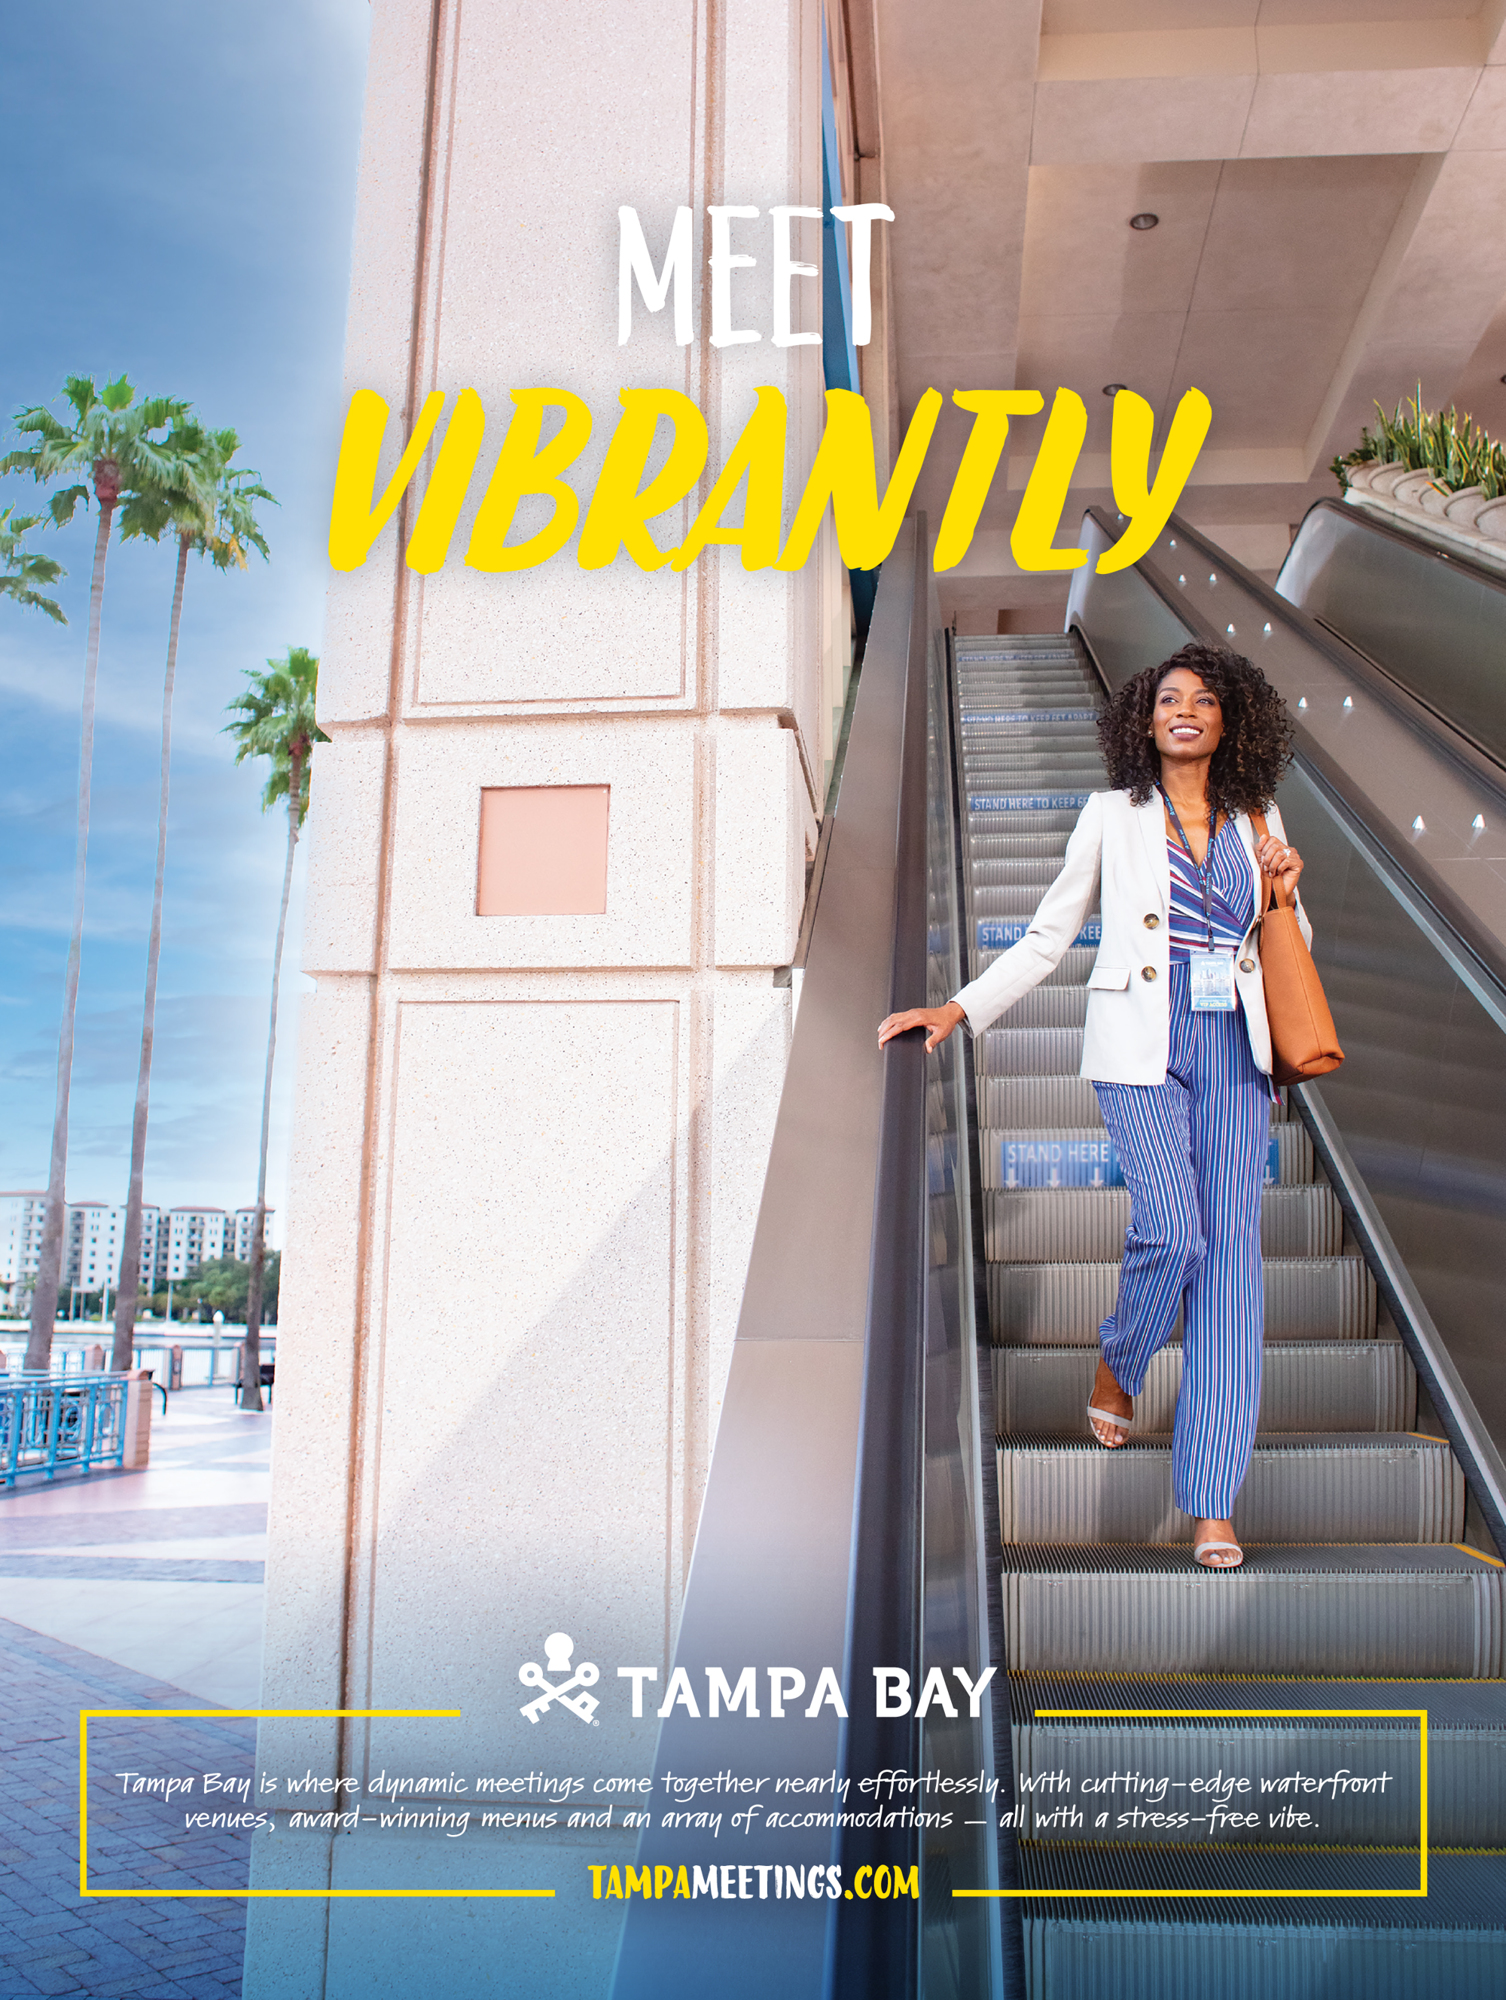 One of the images from FKQ's new campaign for Visit Tampa Bay, targeting business travelers and event planners. (Courtesy photo)